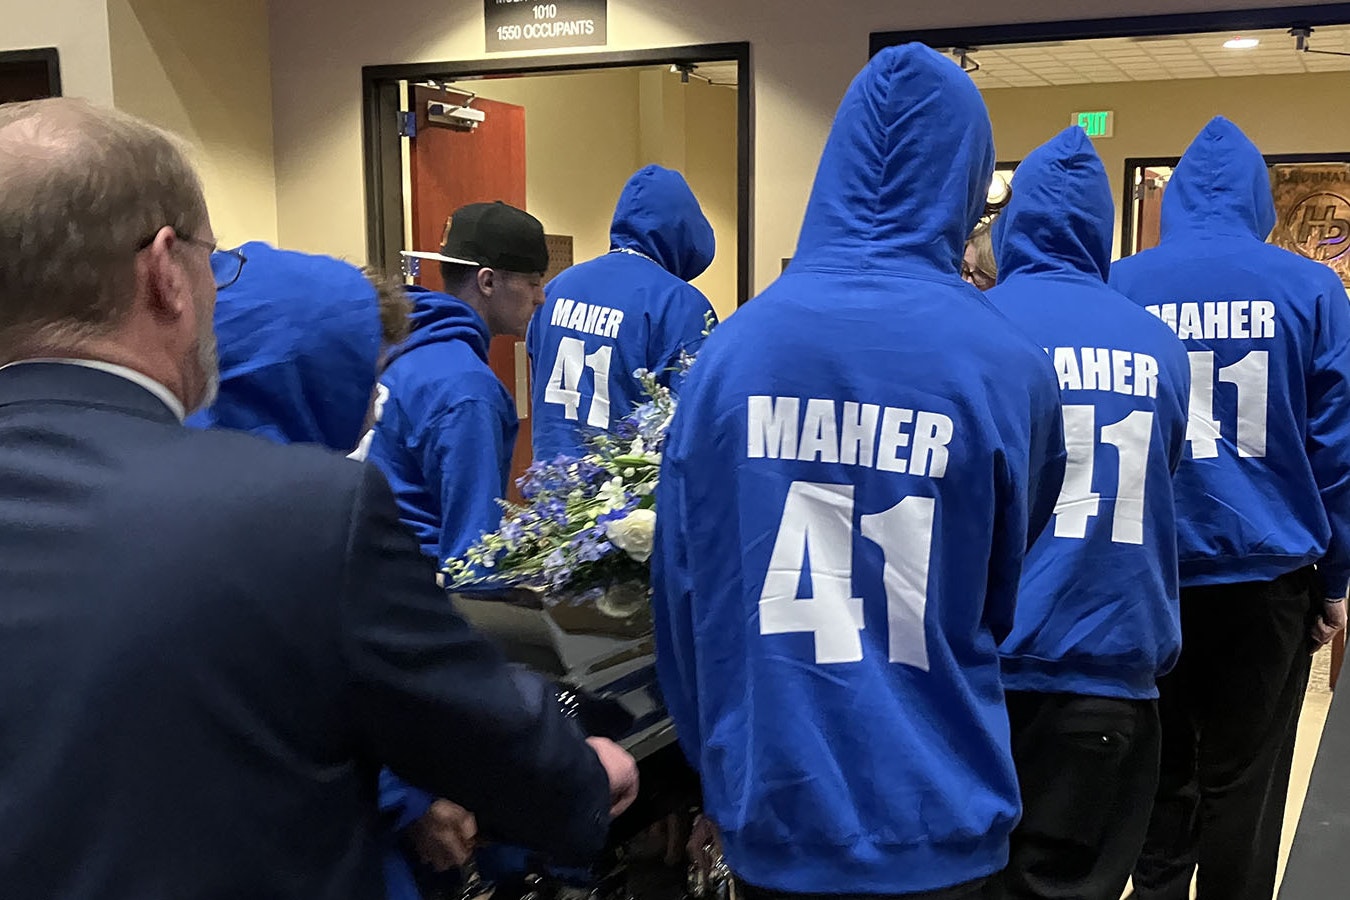 Bobby Maher’s pallbearers, who included his brothers and friends, all word blue hooded sweatshirts with his name and baseball jersey number, “41.”